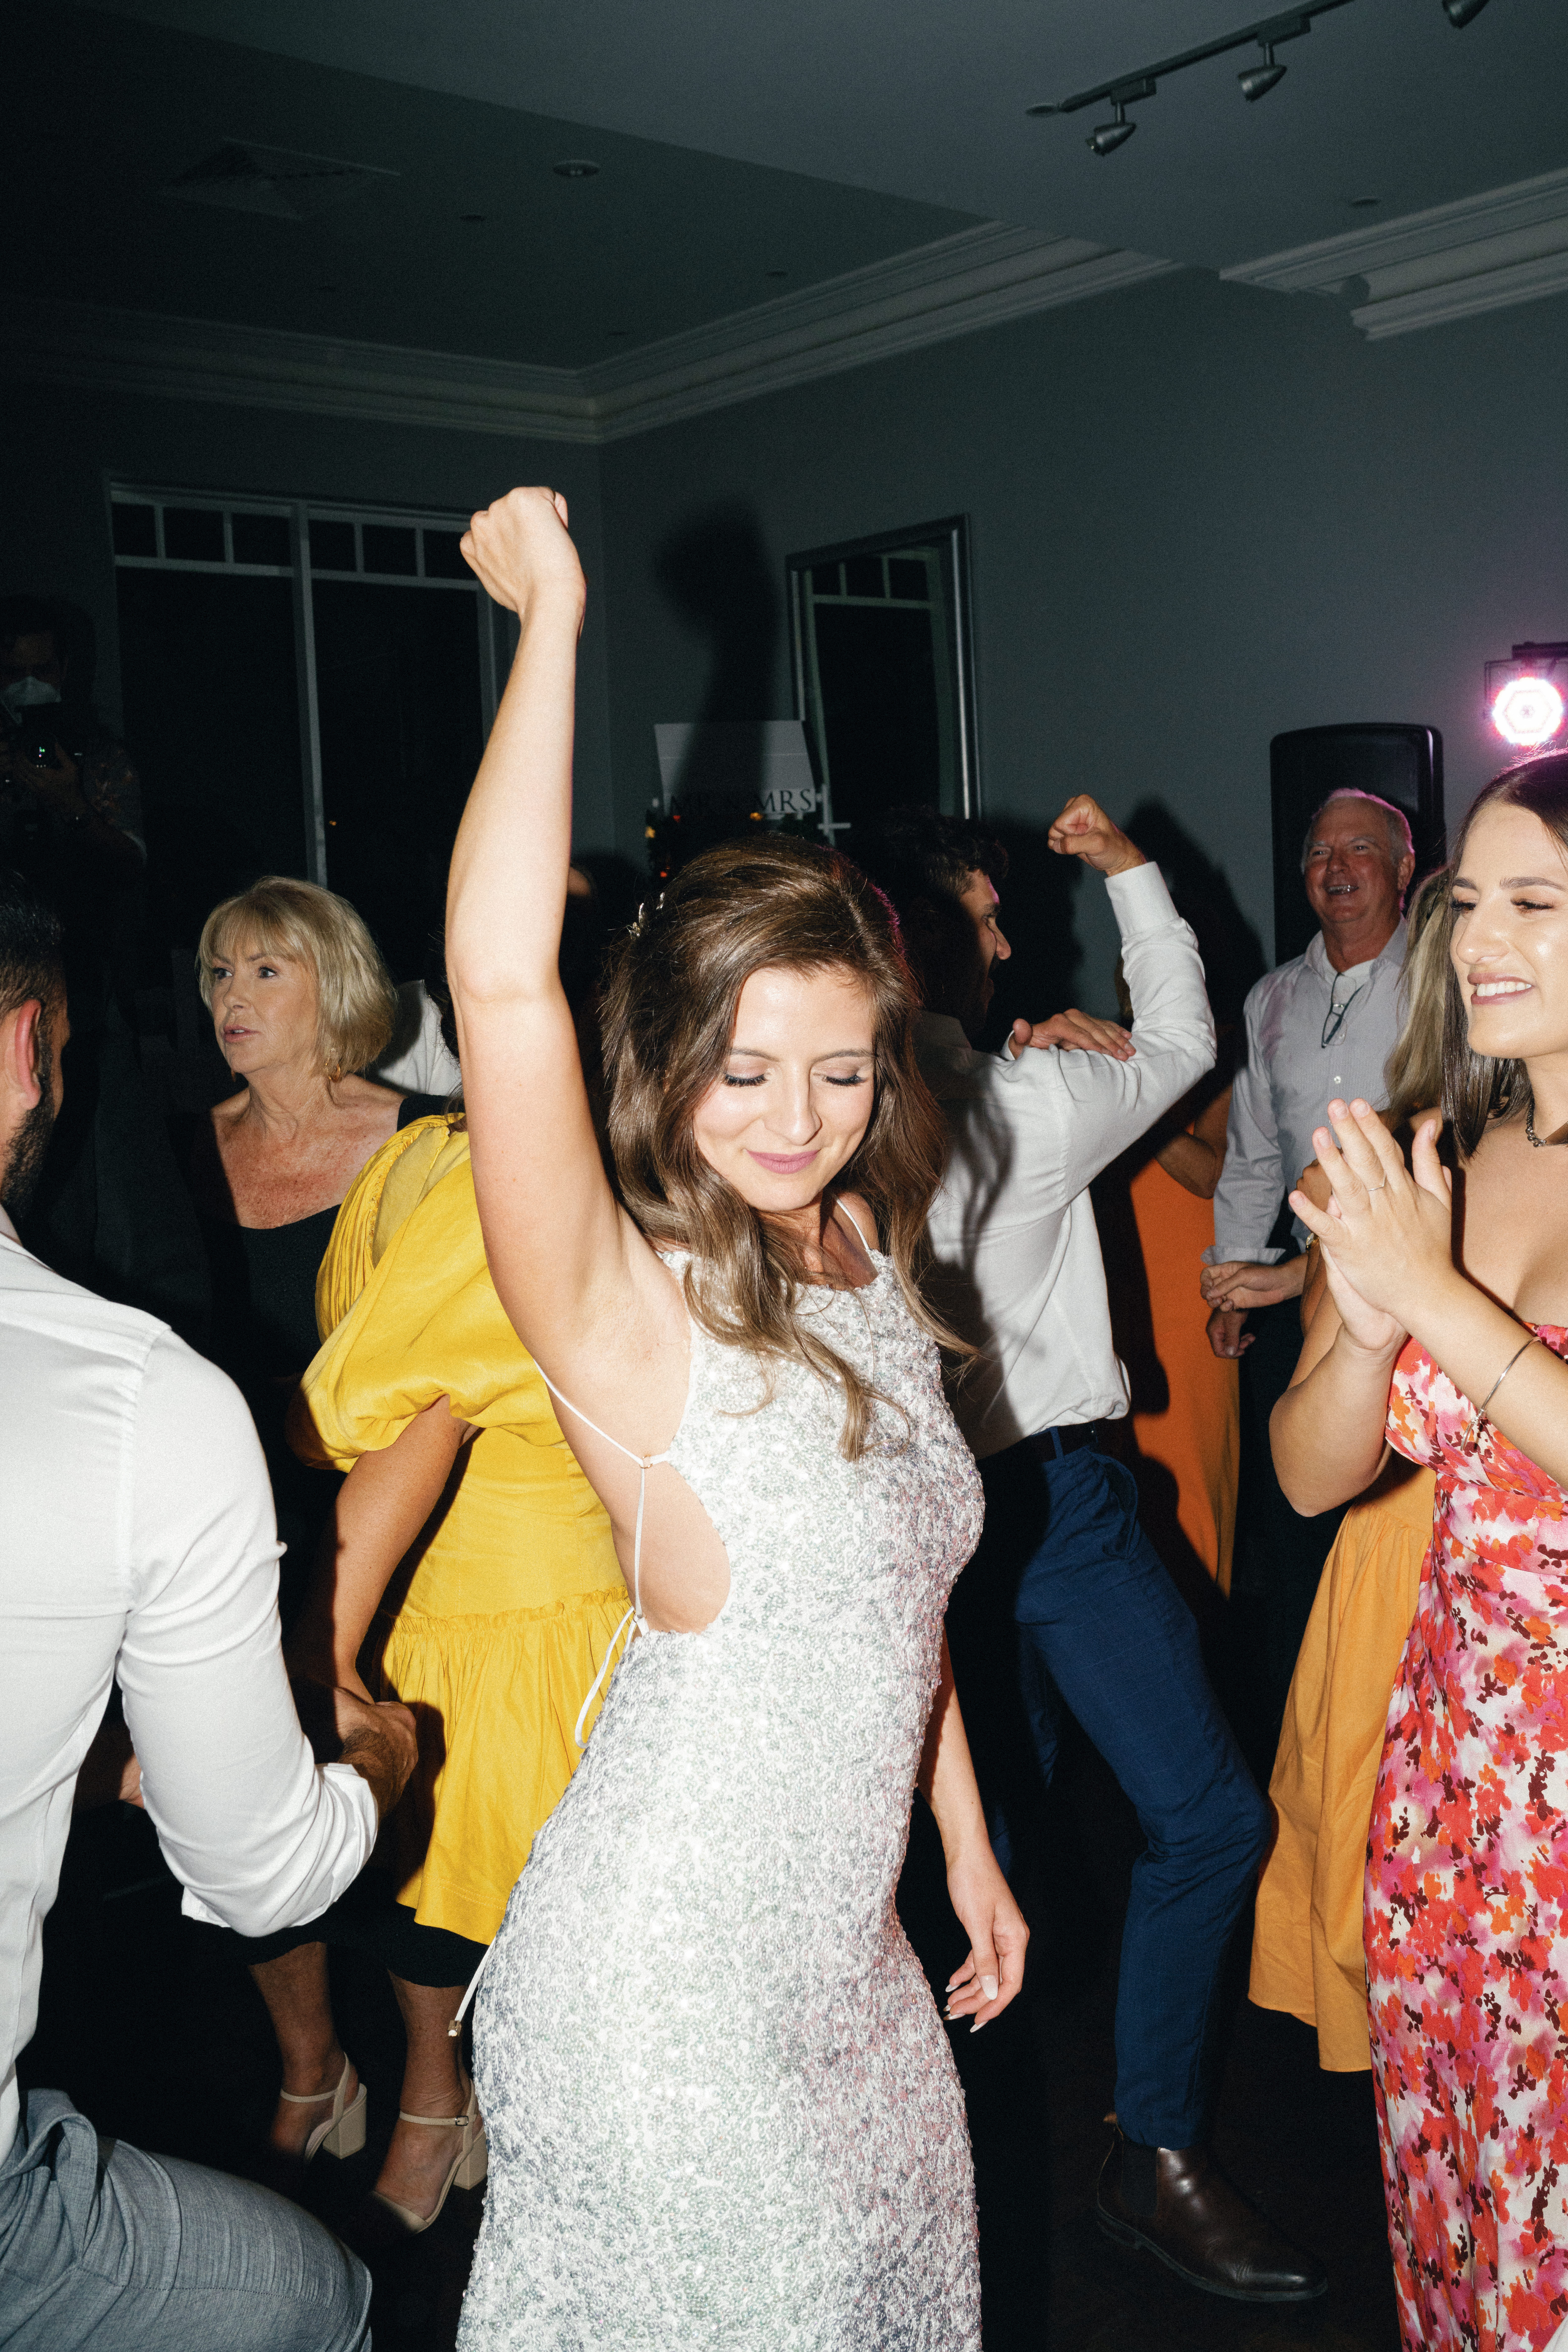 An image shot using flash of a bride partying on the dance floor.